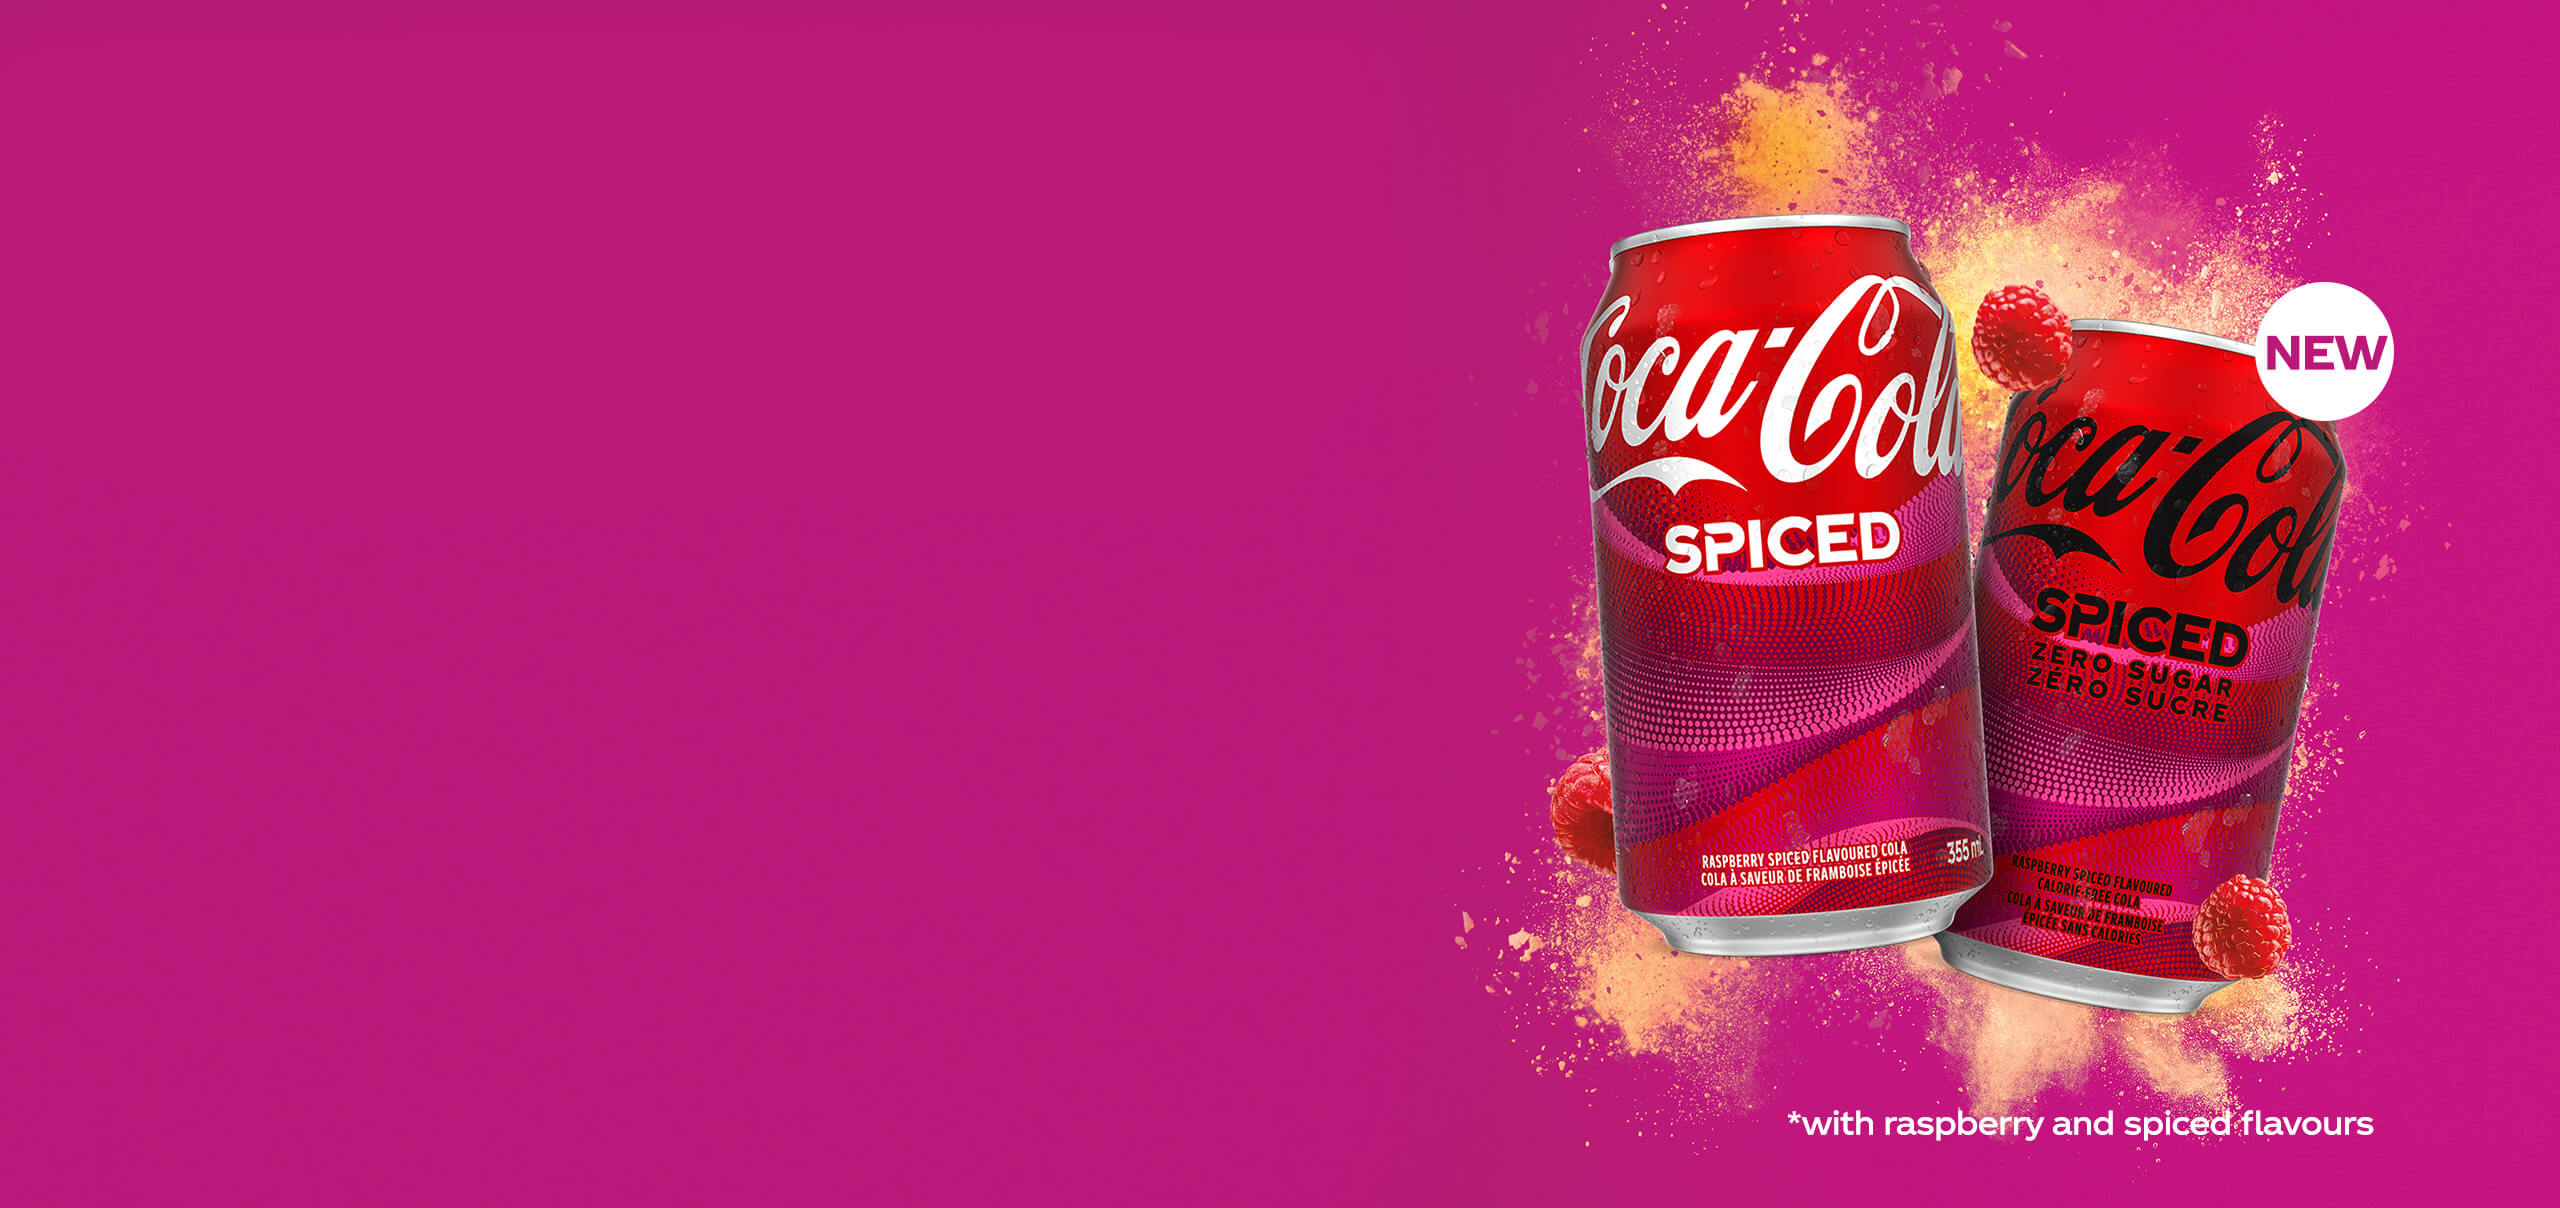 Coca-Cola Spiced *with raspberry and spiced flavours.